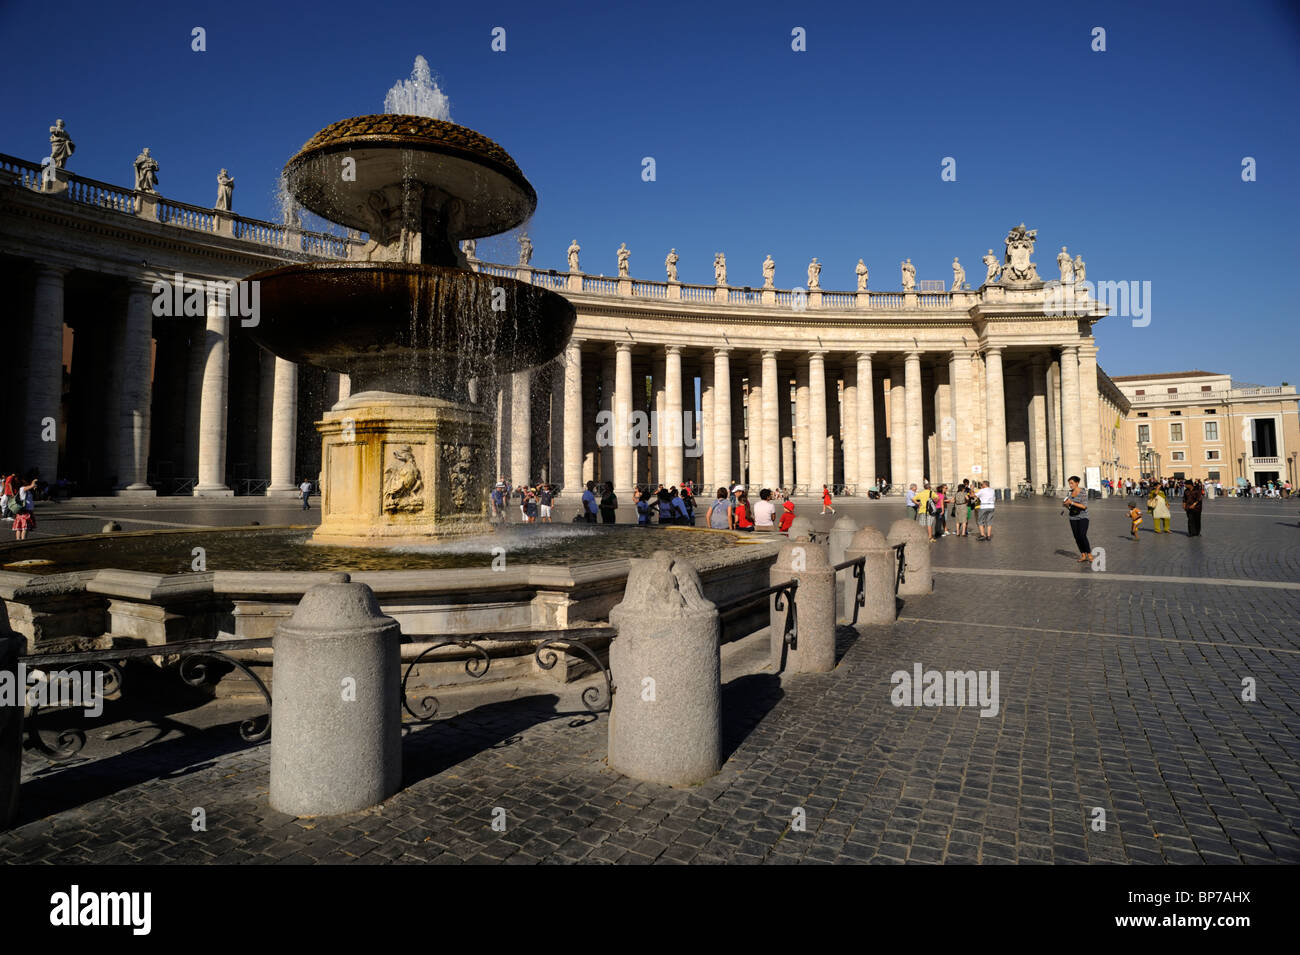 Italy, Rome, St Peter's square, fountain and colonnade Stock Photo